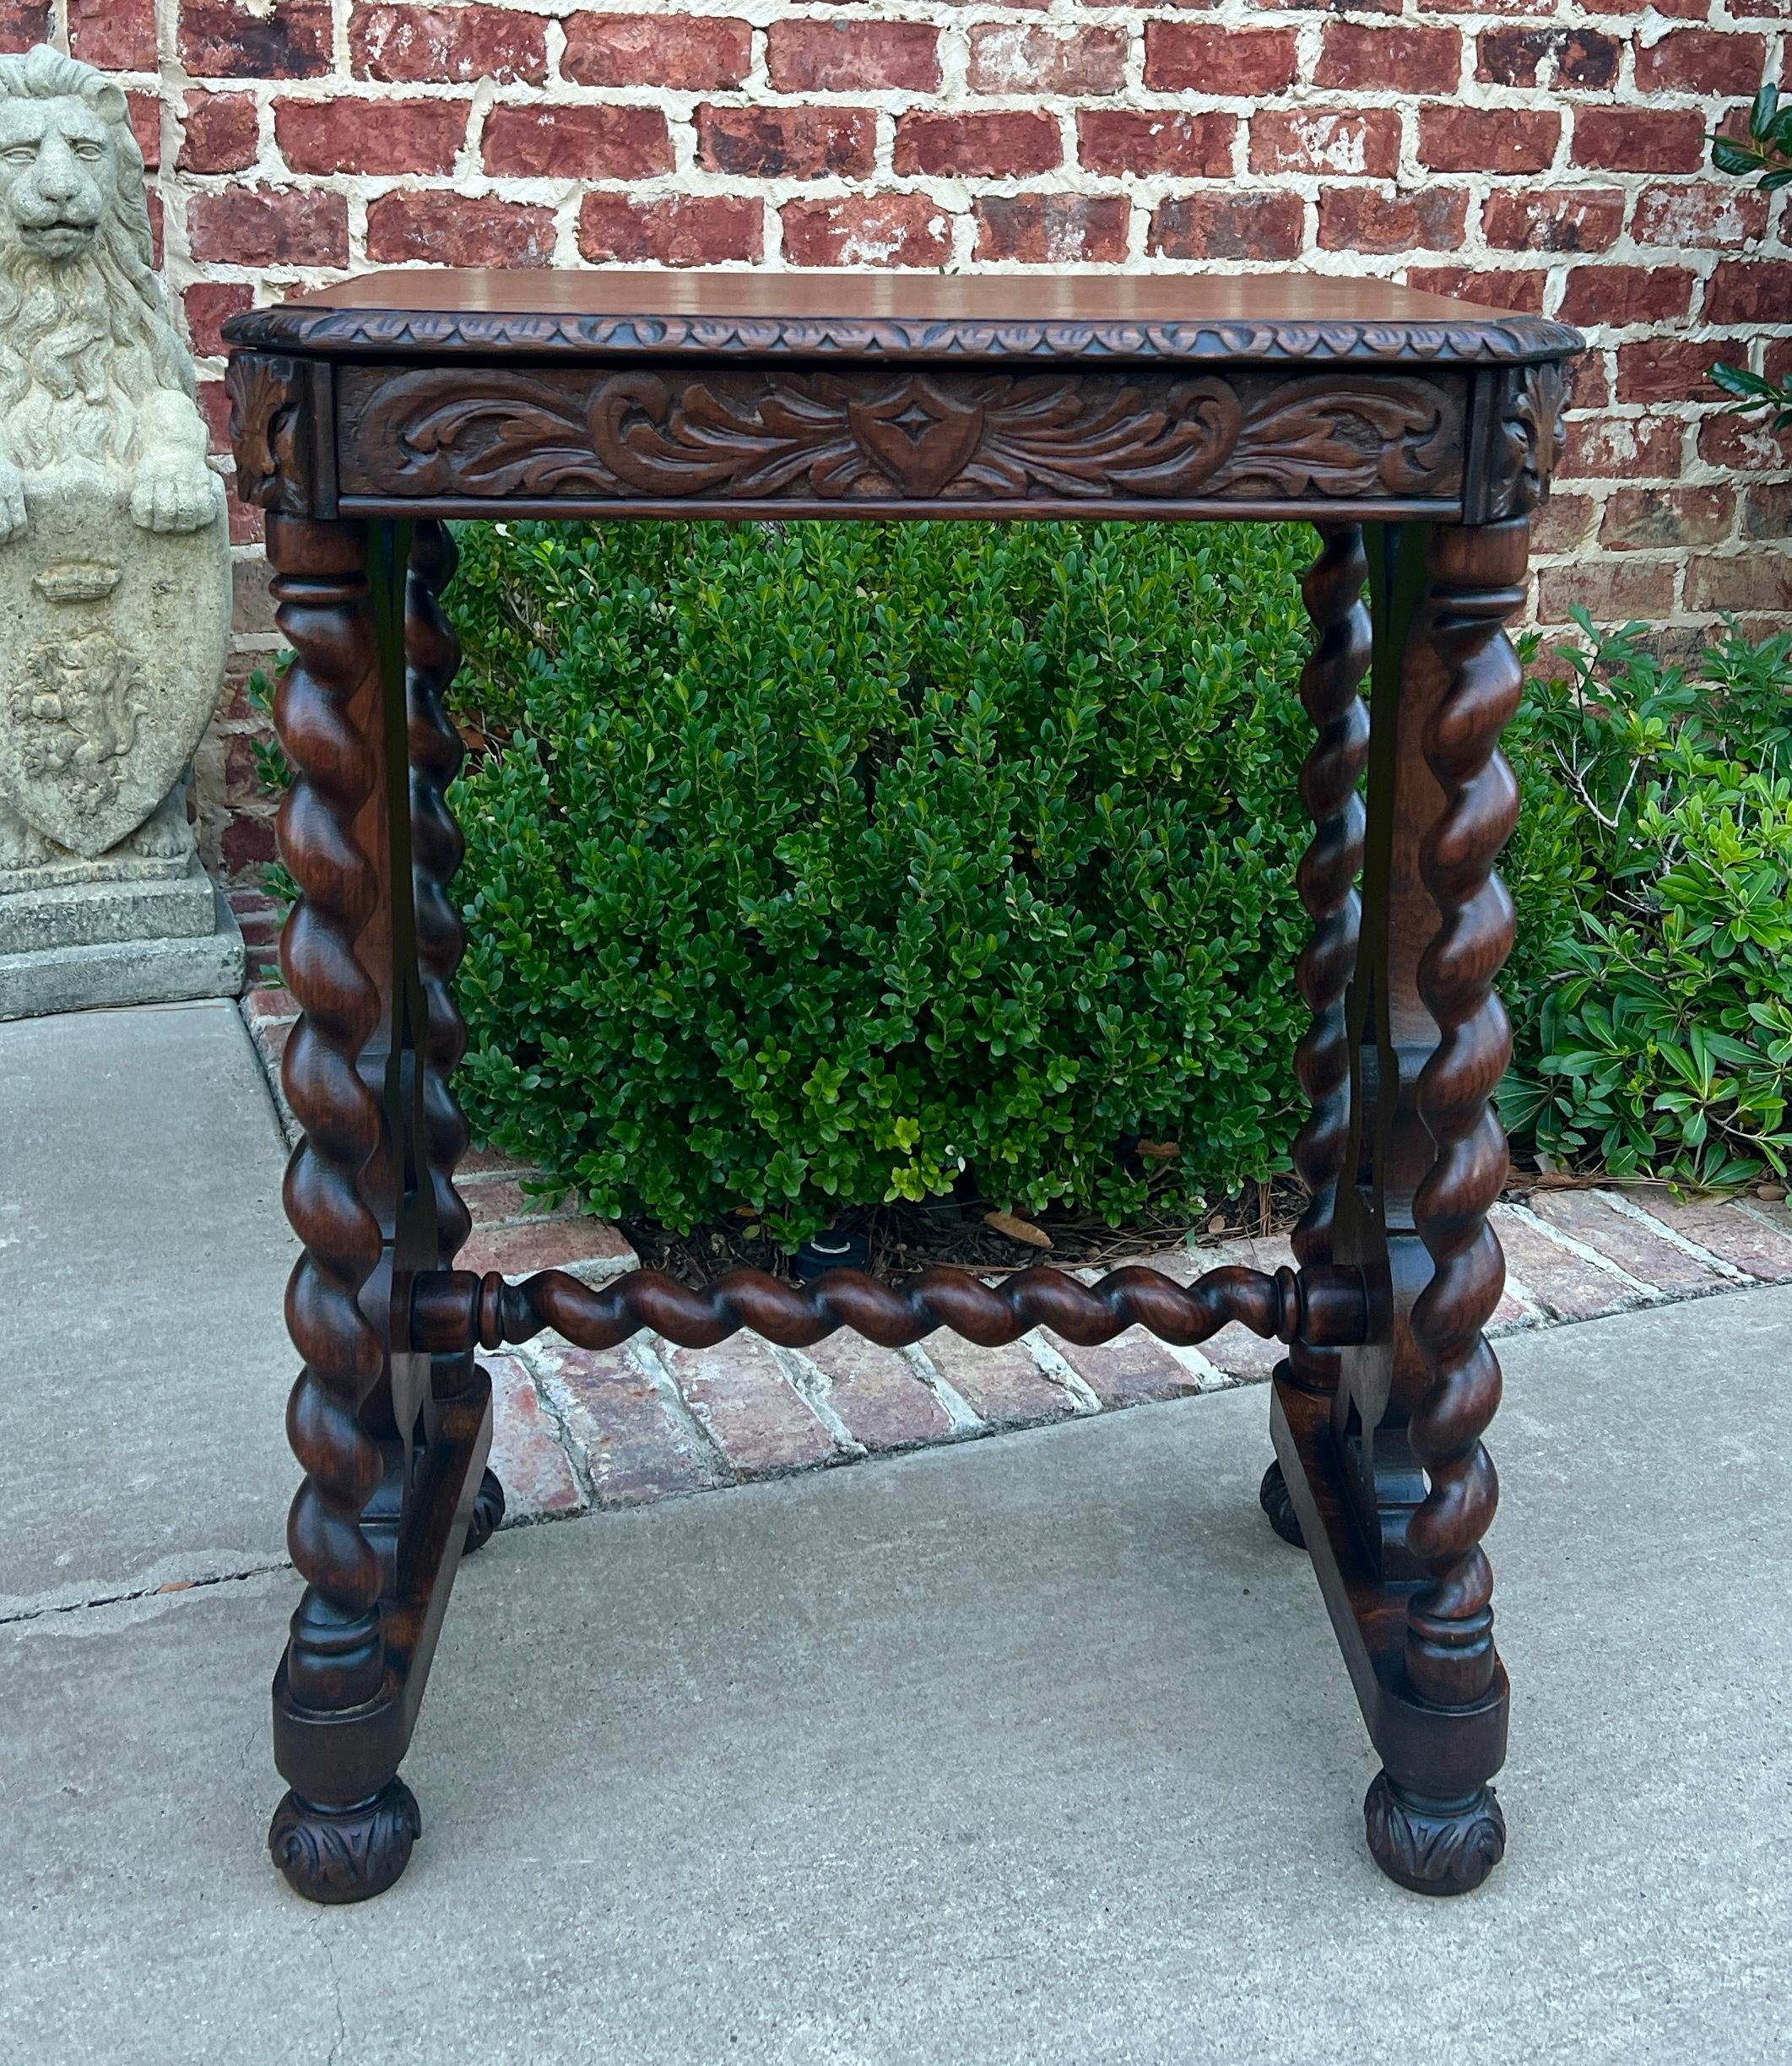 BEAUTIFUL Late 19th Century Antique French Carved Oak Barley Twist Accent Table, End Table, Entry, Hall, Sofa, or Center Table with Drawer~~Victorian Era Renaissance Revival
~~c. 1890s~~ RARE~~

These versatile tables were very popular in late